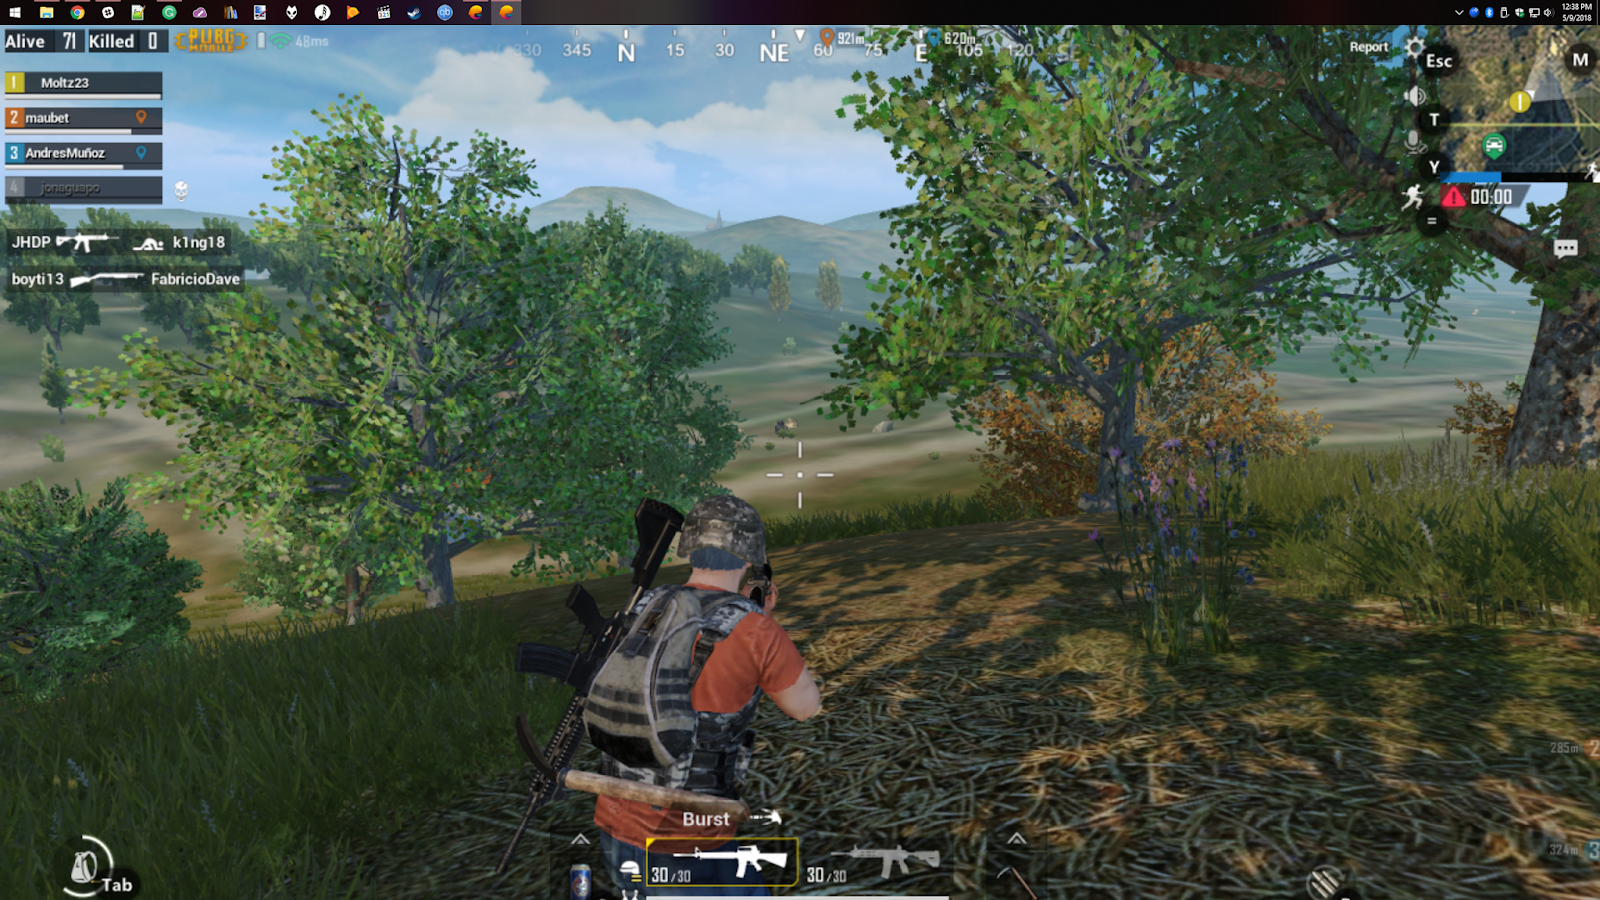 Tencents best ever emulator for pubg фото 21